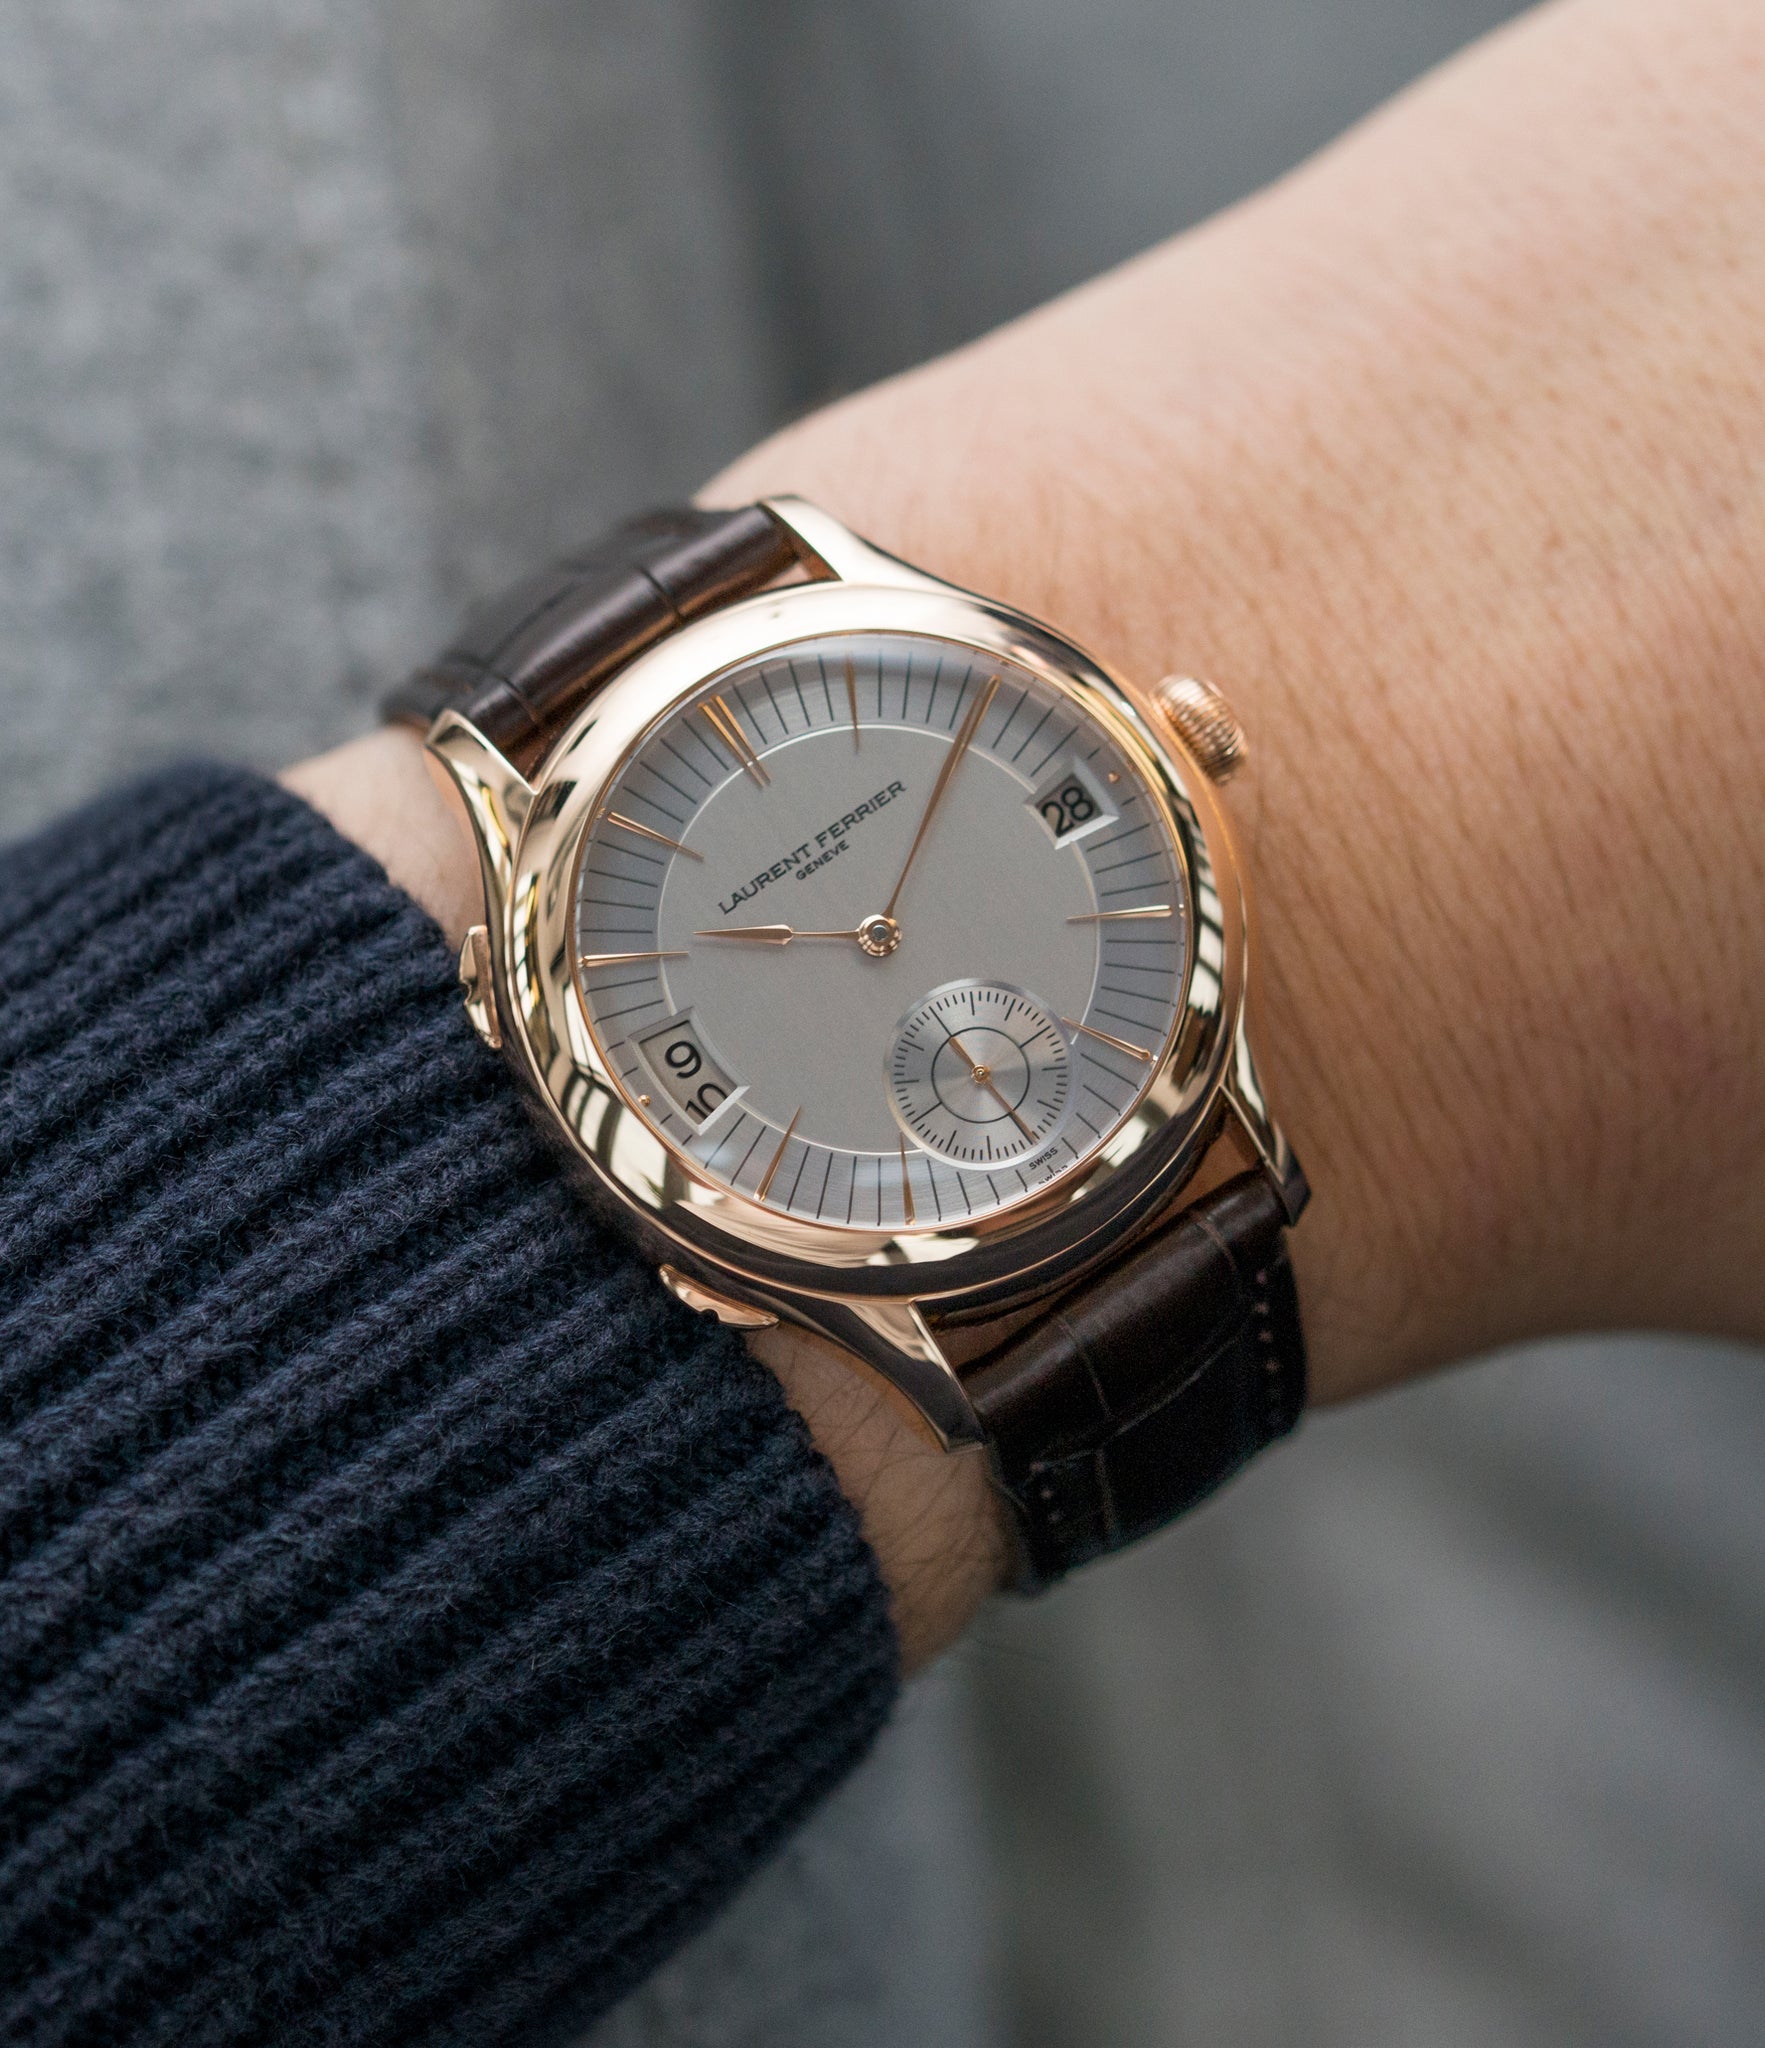 buy luxury wristwatch Laurent Ferrier Galet Traveller Micro Rotor LF 230.01 rose gold watch additional prototype dial for sale online at A Collected Man London UK approved reseller of preowned independent watchmakers